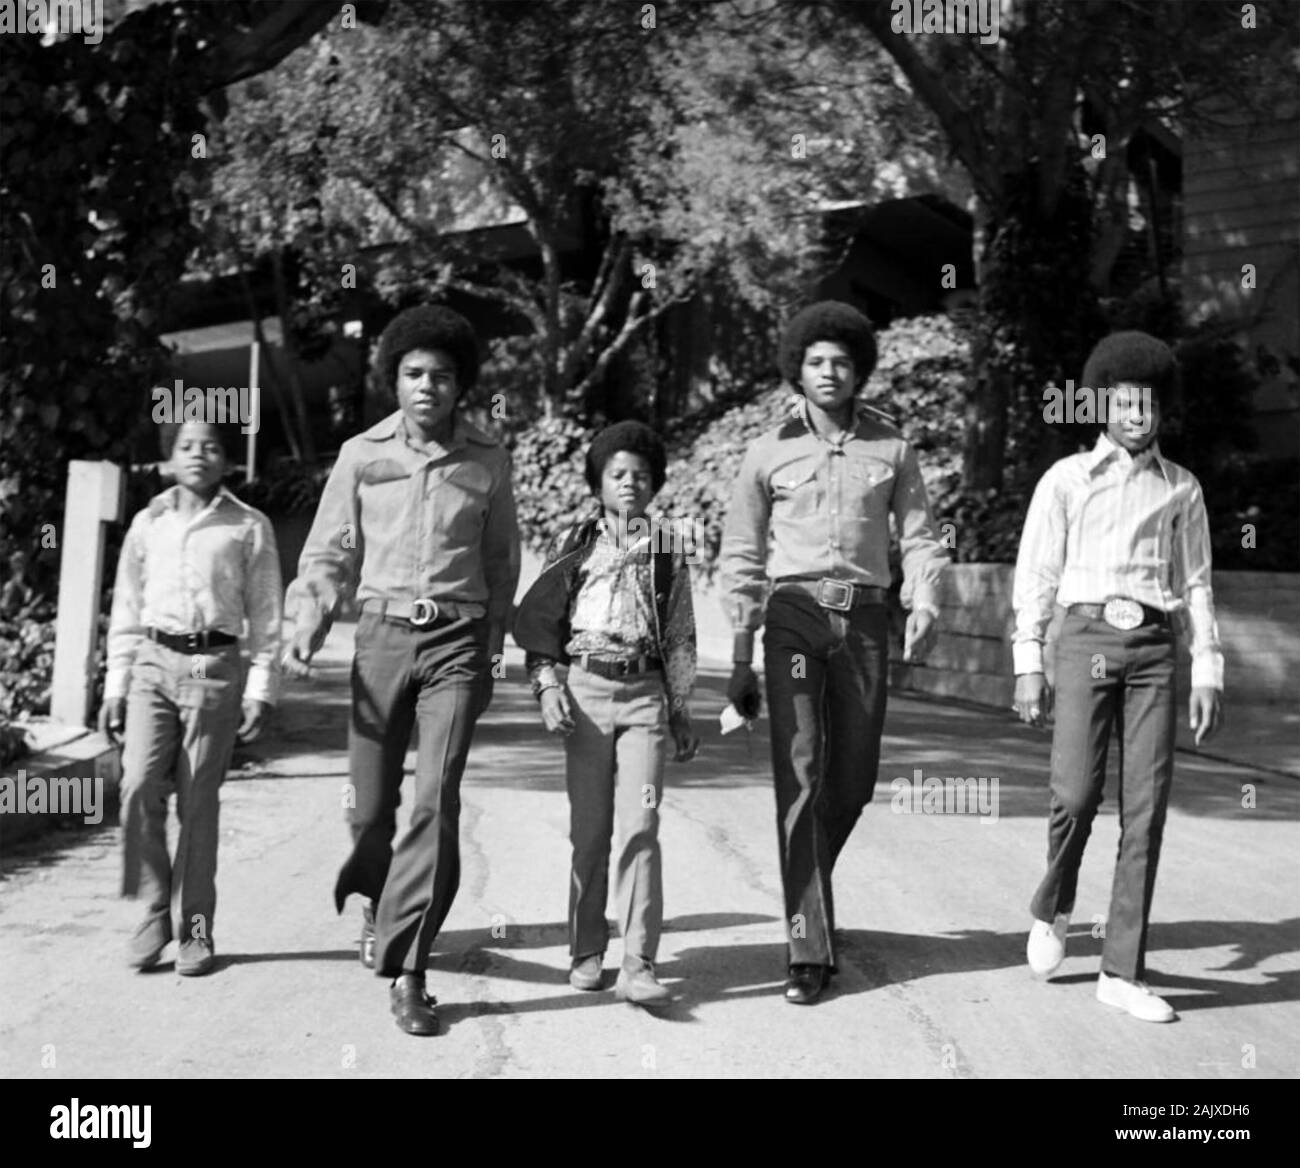 JACKSON 5 Promotional photo of American pop band about 1970 with Michael Jackson centre Stock Photo